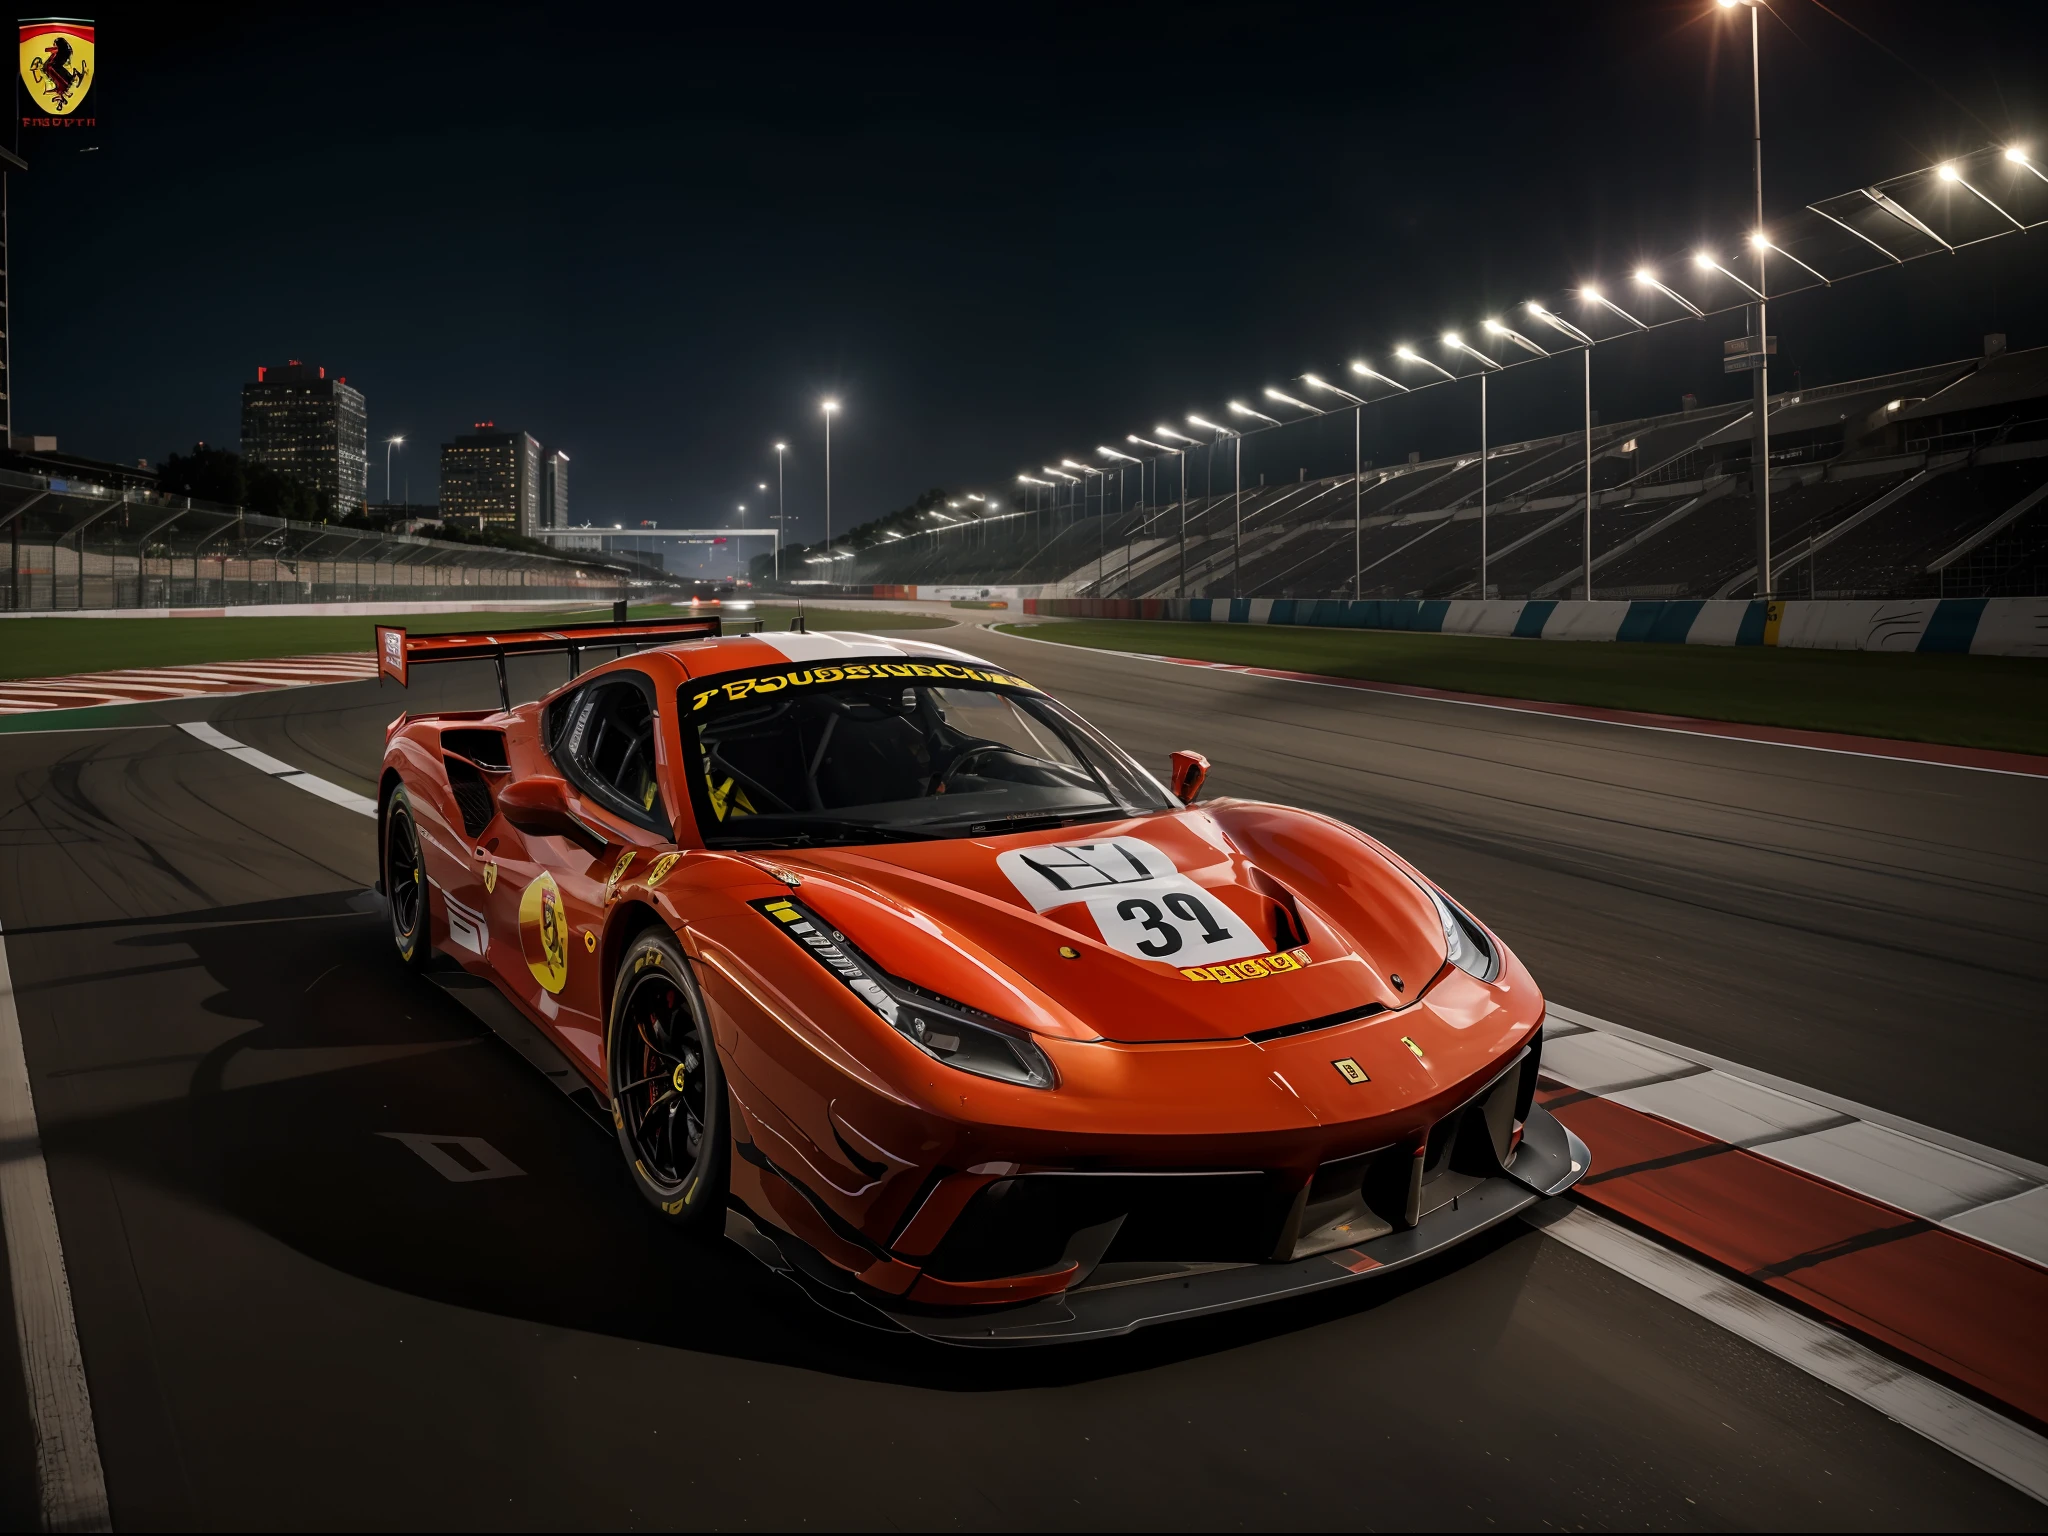 "an Quority(ferrari 488 gt3)Racing cars race around the city circuit at night，A breath of blood and speed。"